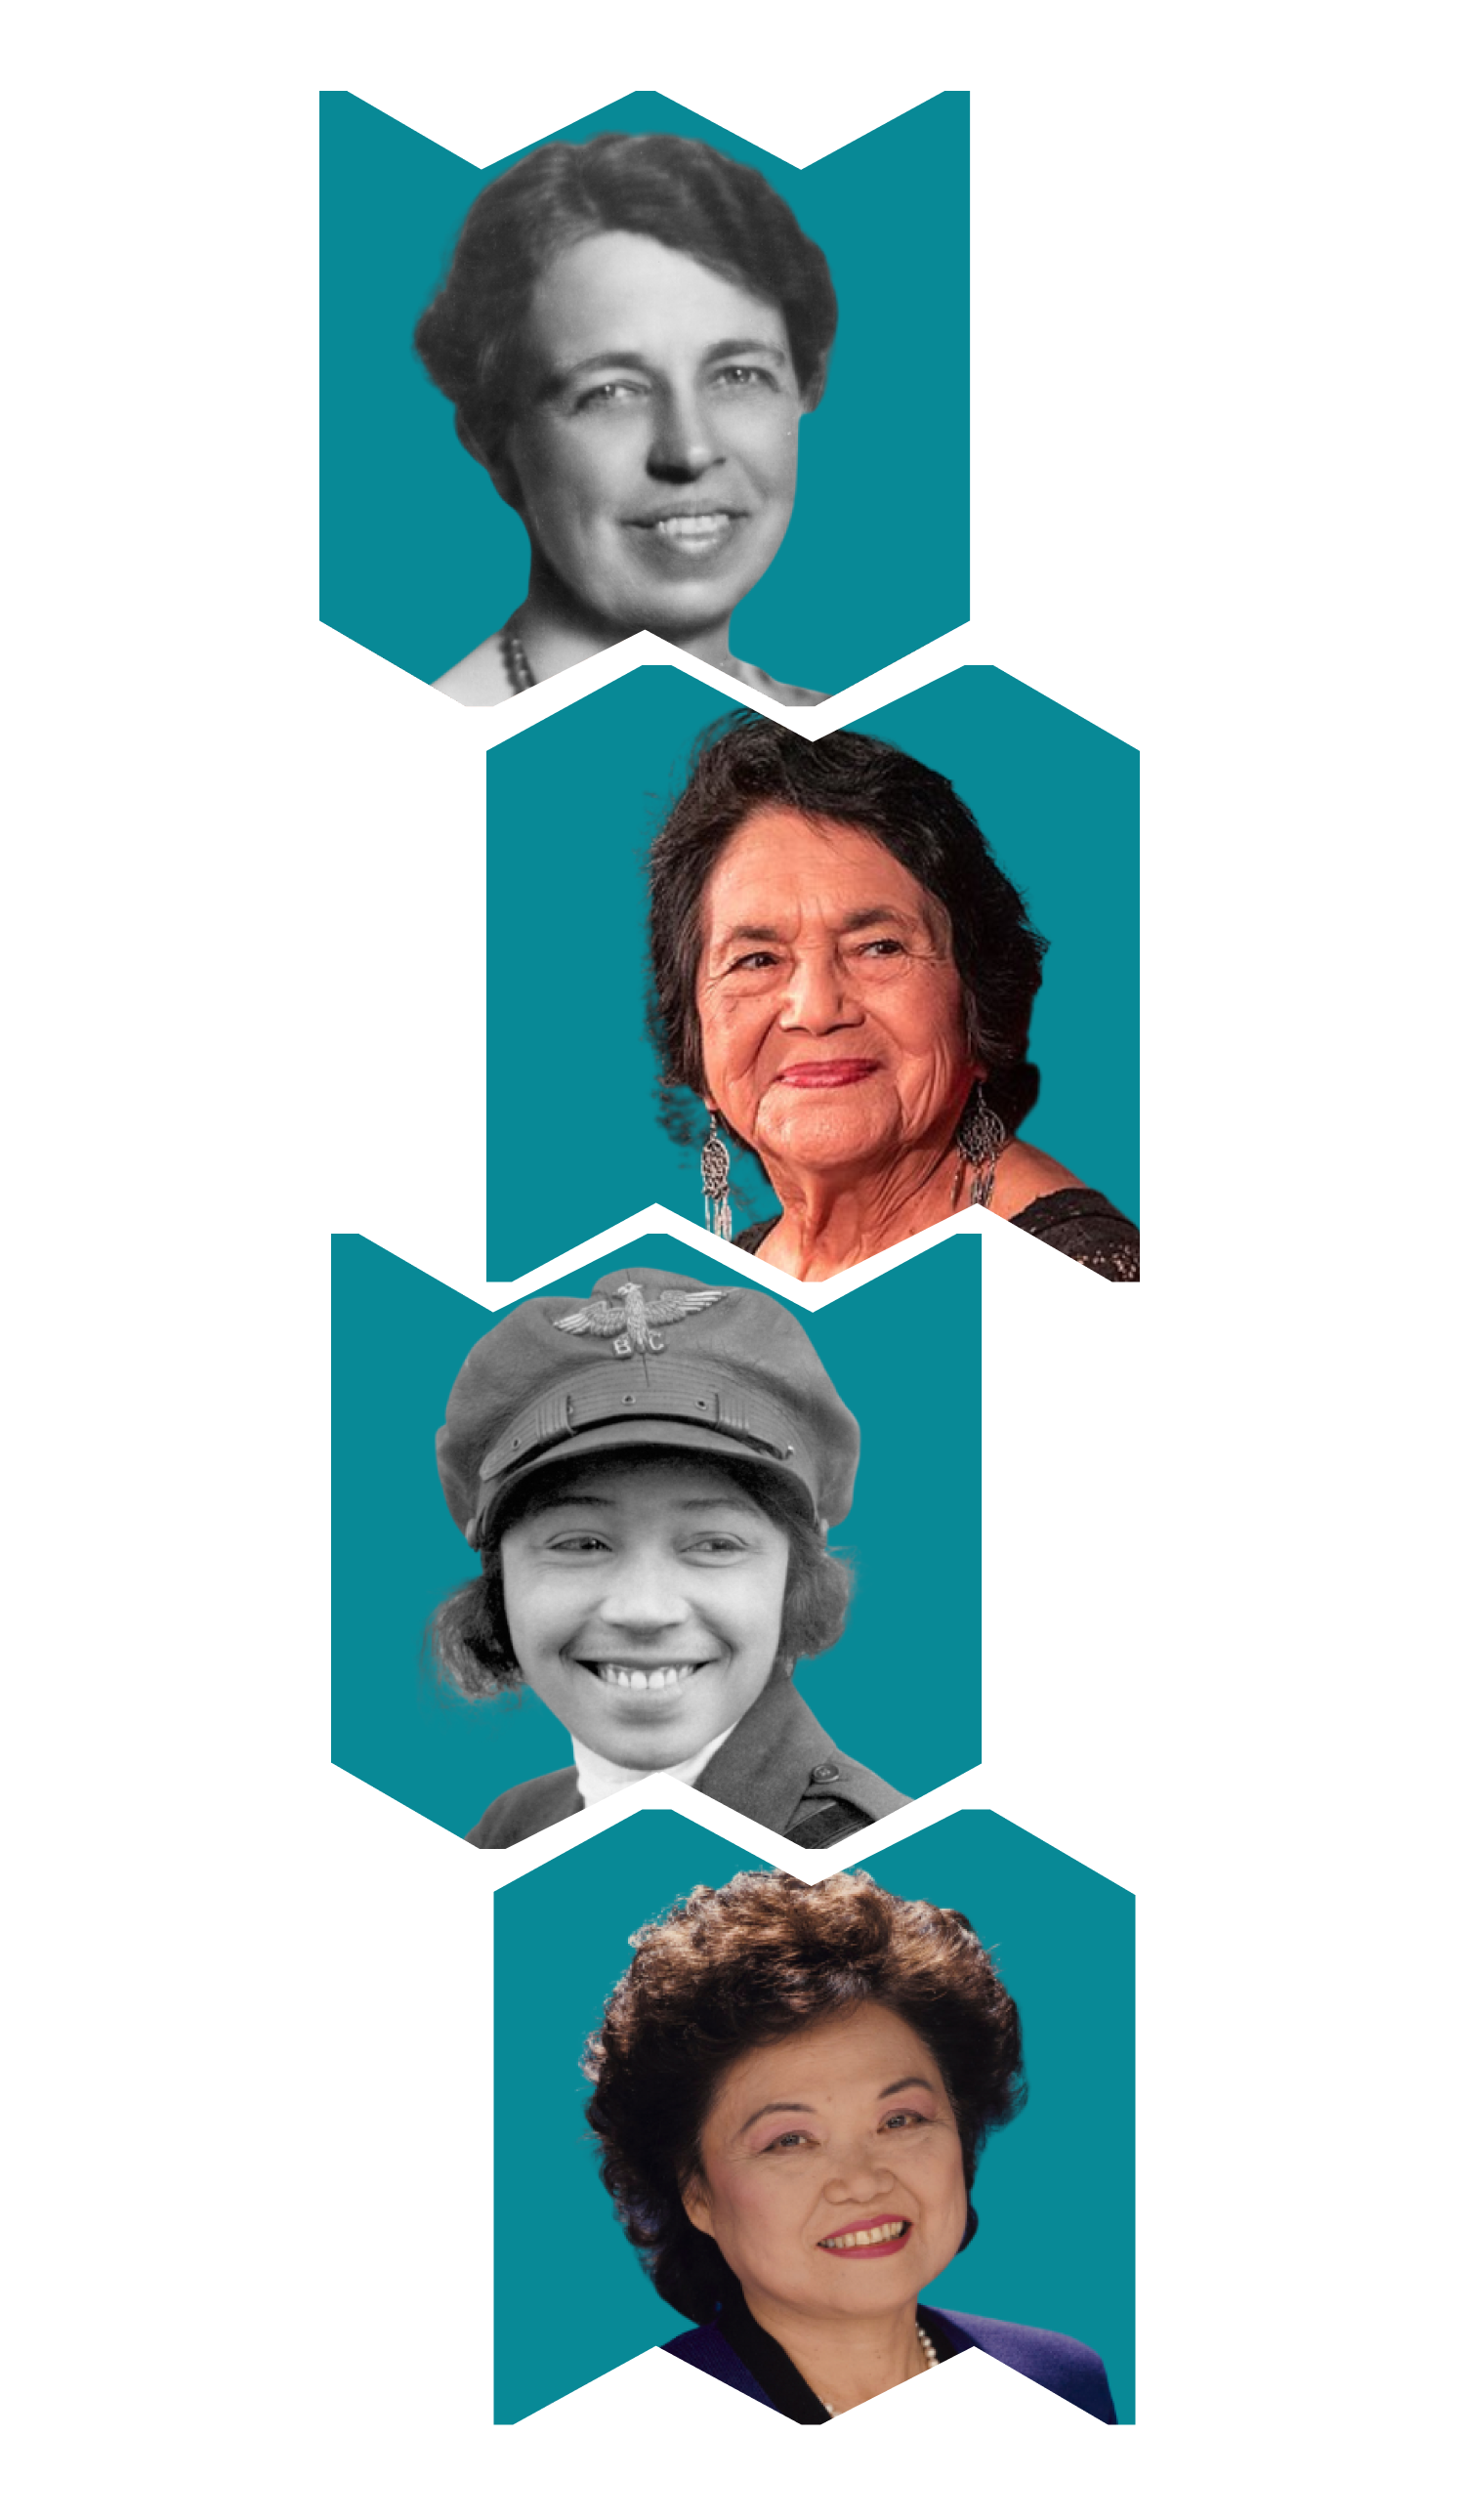 From top to bottom, in alternating "W" and "M" frames: Headshots of Eleanor Roosevelt, Dolores Huerta, Bessie Coleman, and Patsy Mink.